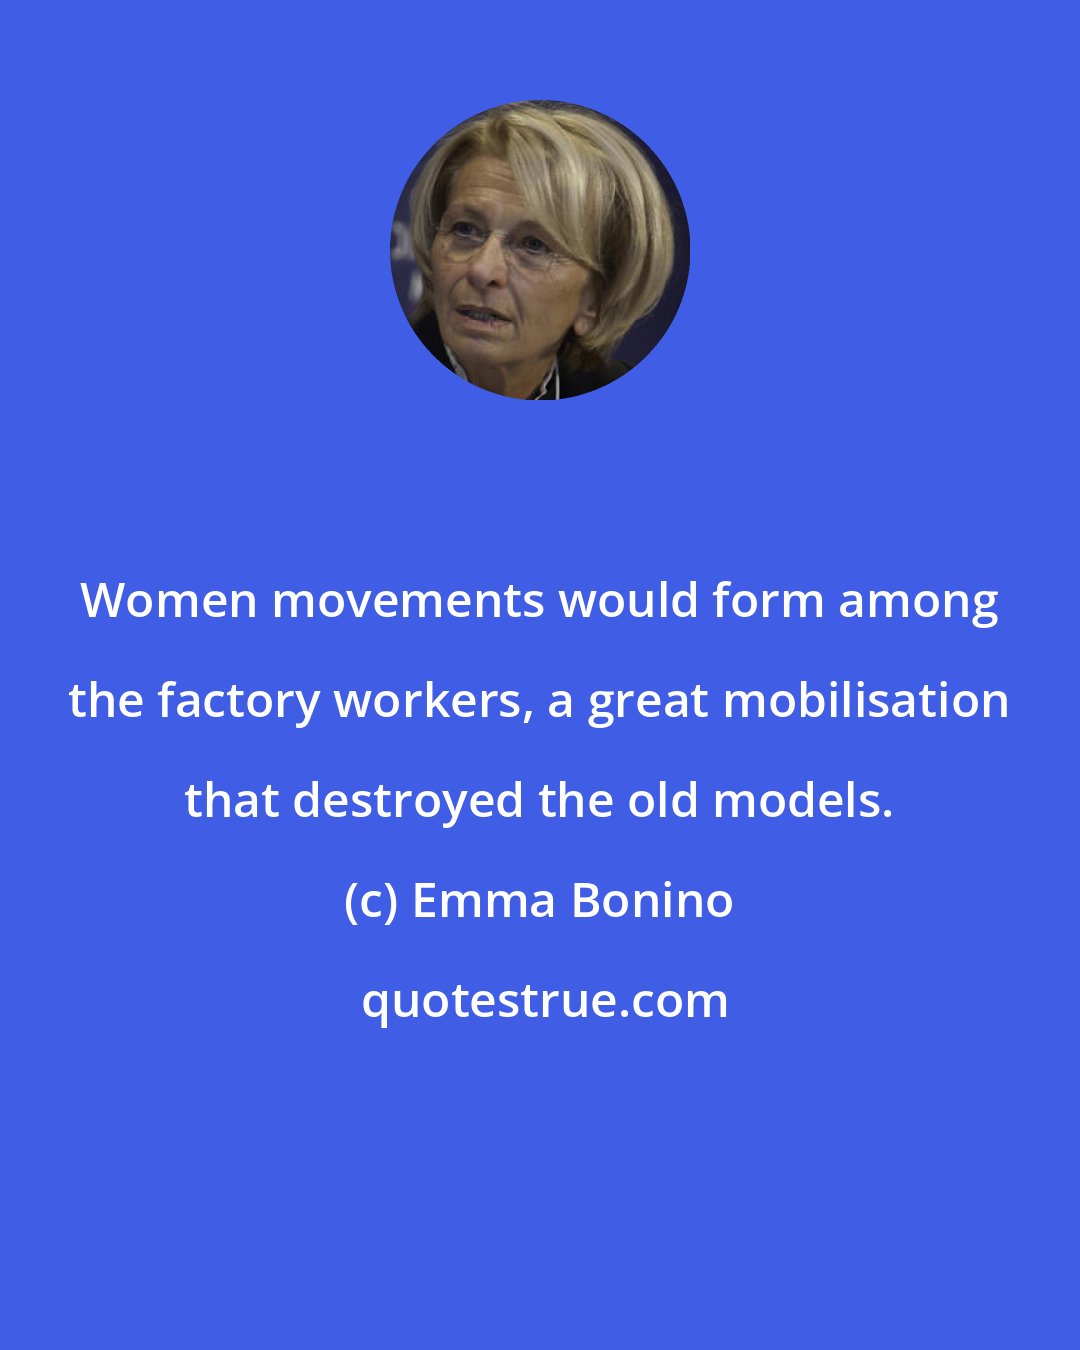 Emma Bonino: Women movements would form among the factory workers, a great mobilisation that destroyed the old models.